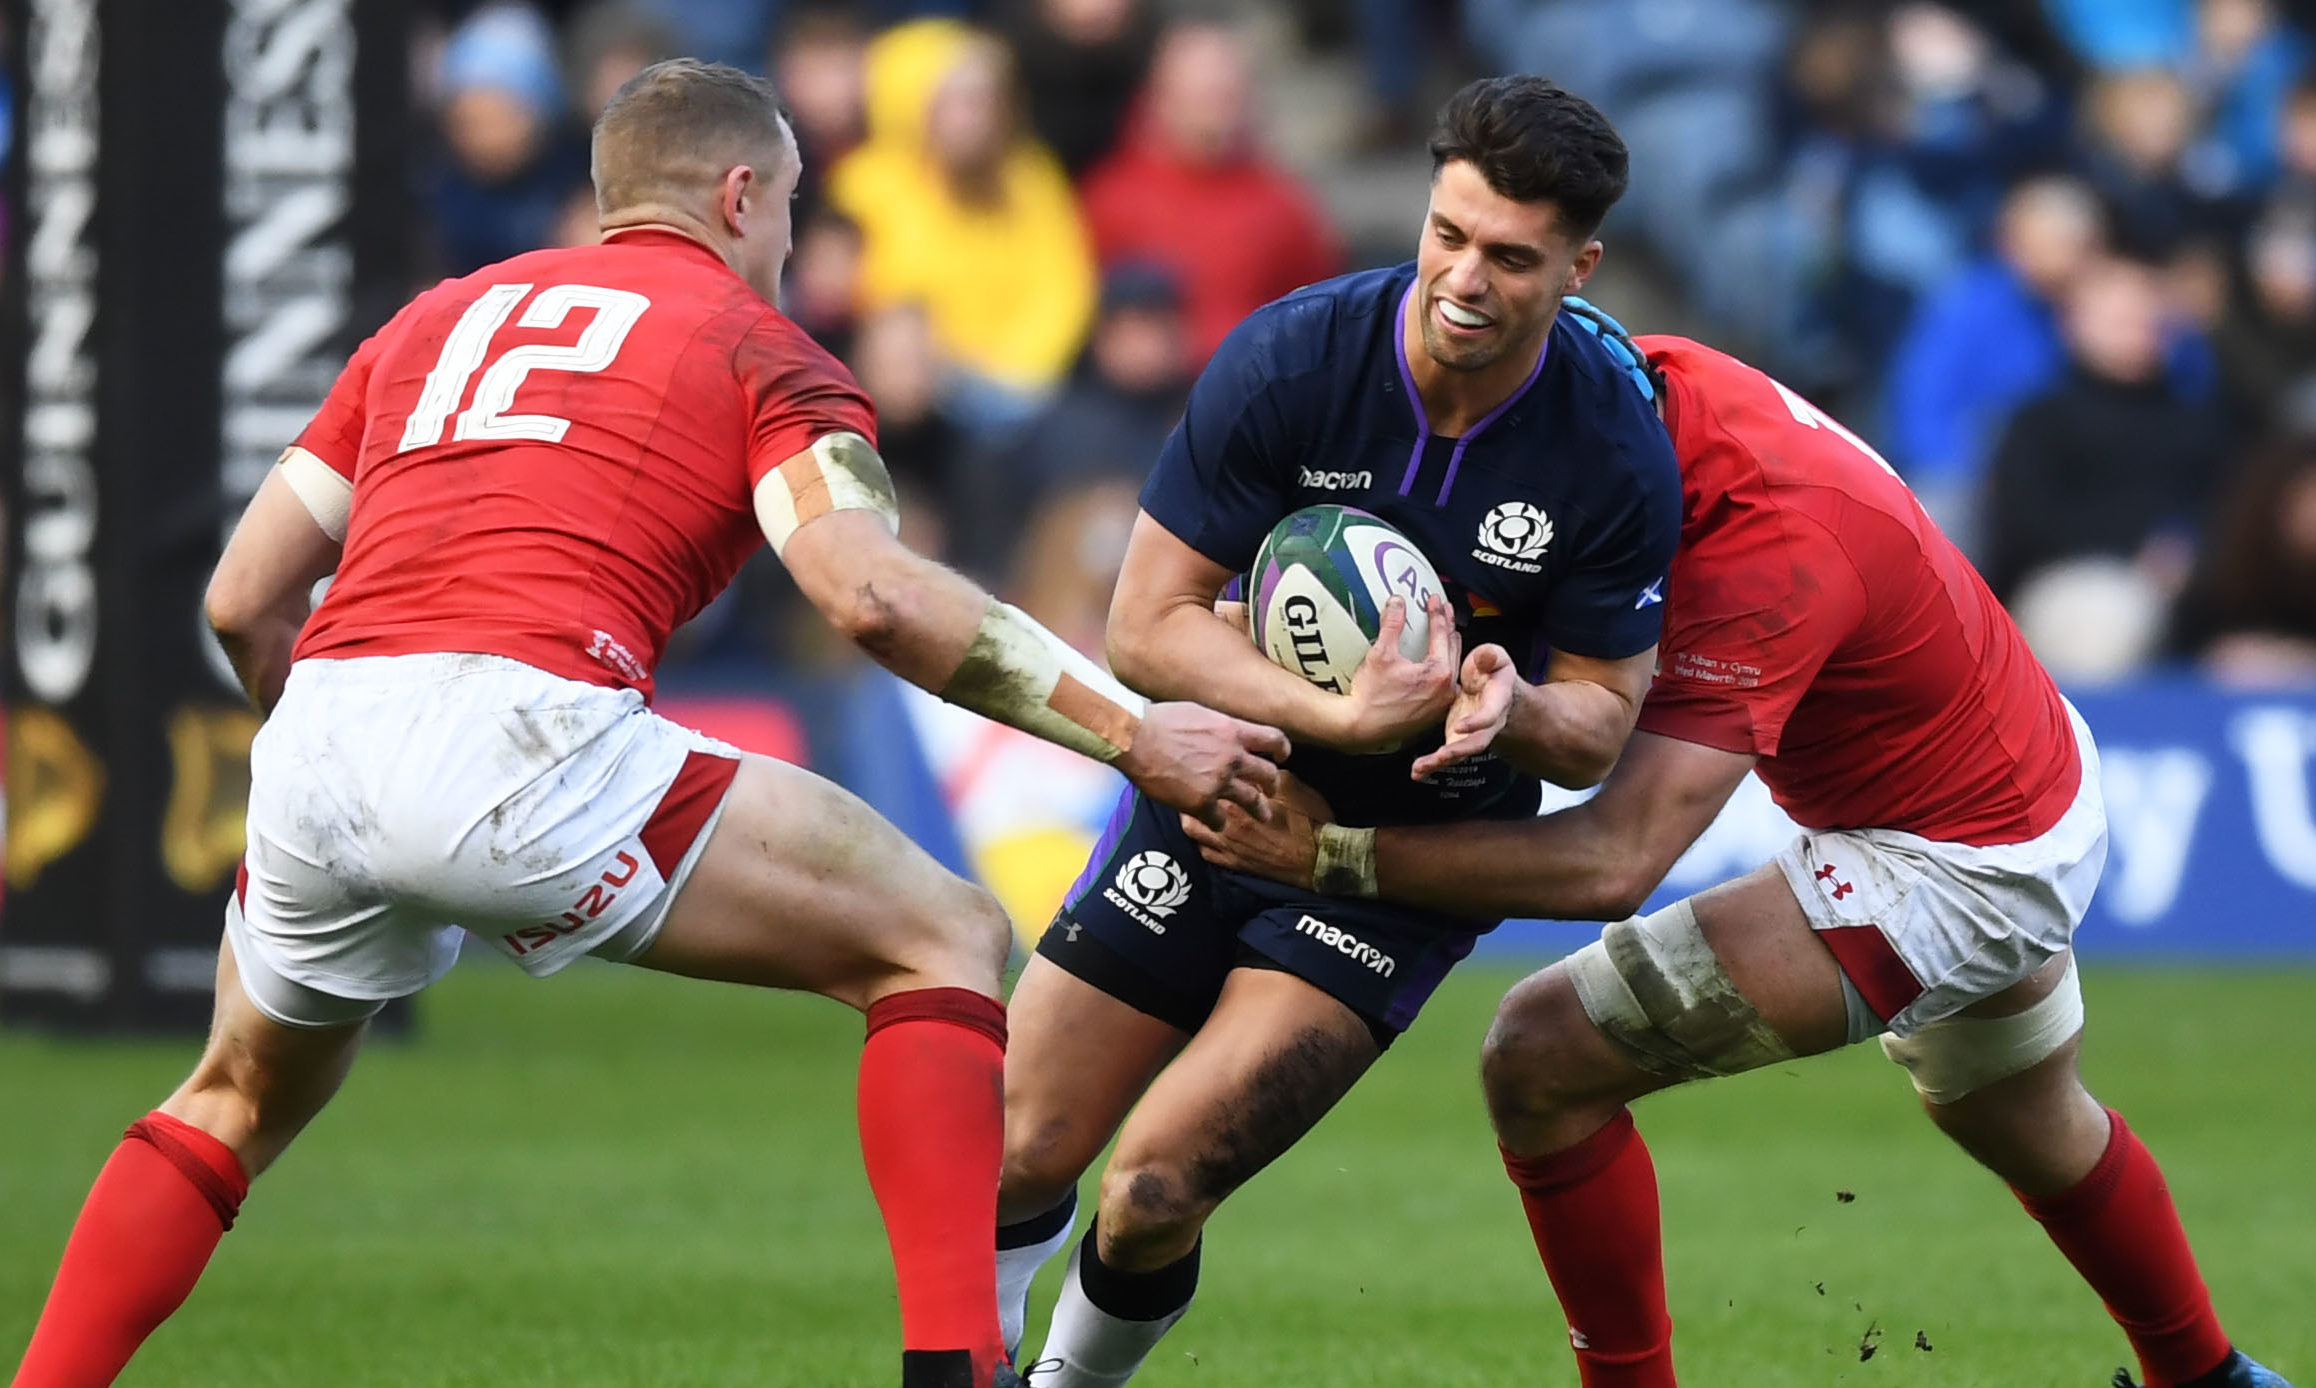 Scotland's Adam Hastings in action against Wales in the 2019 Six Nations clash.